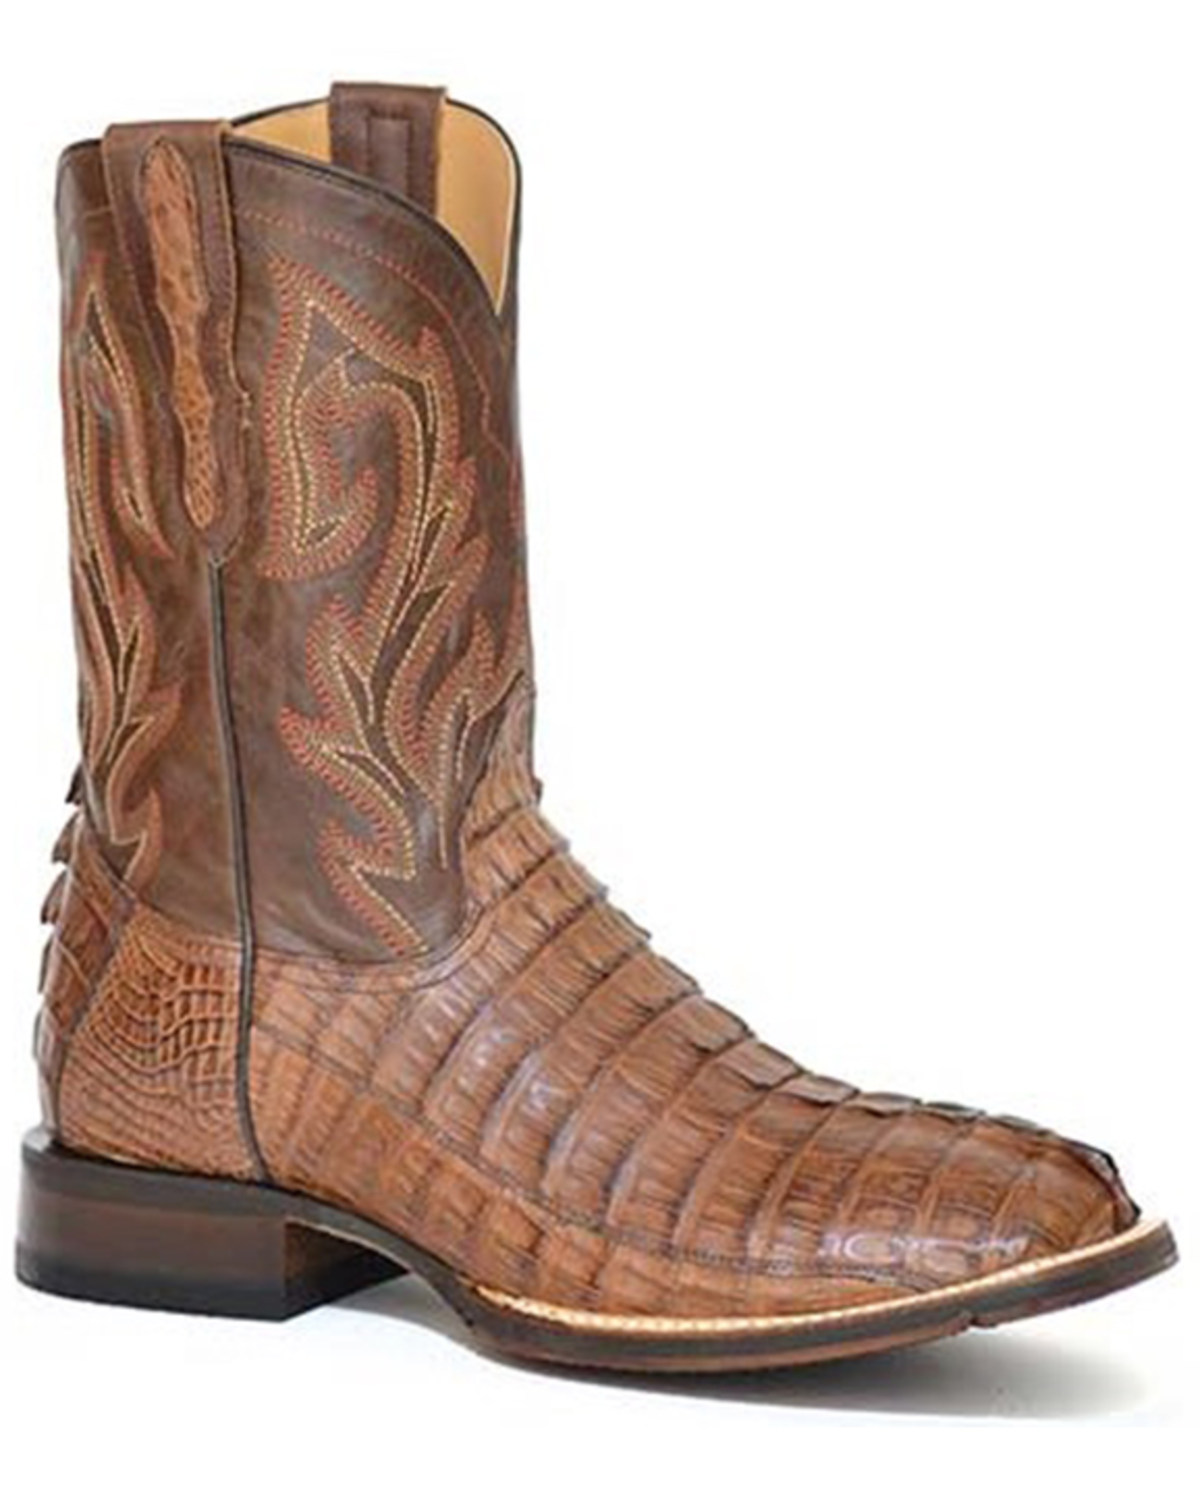 Stetson Men's Exotic Caiman Western Boots - Broad Square Toe